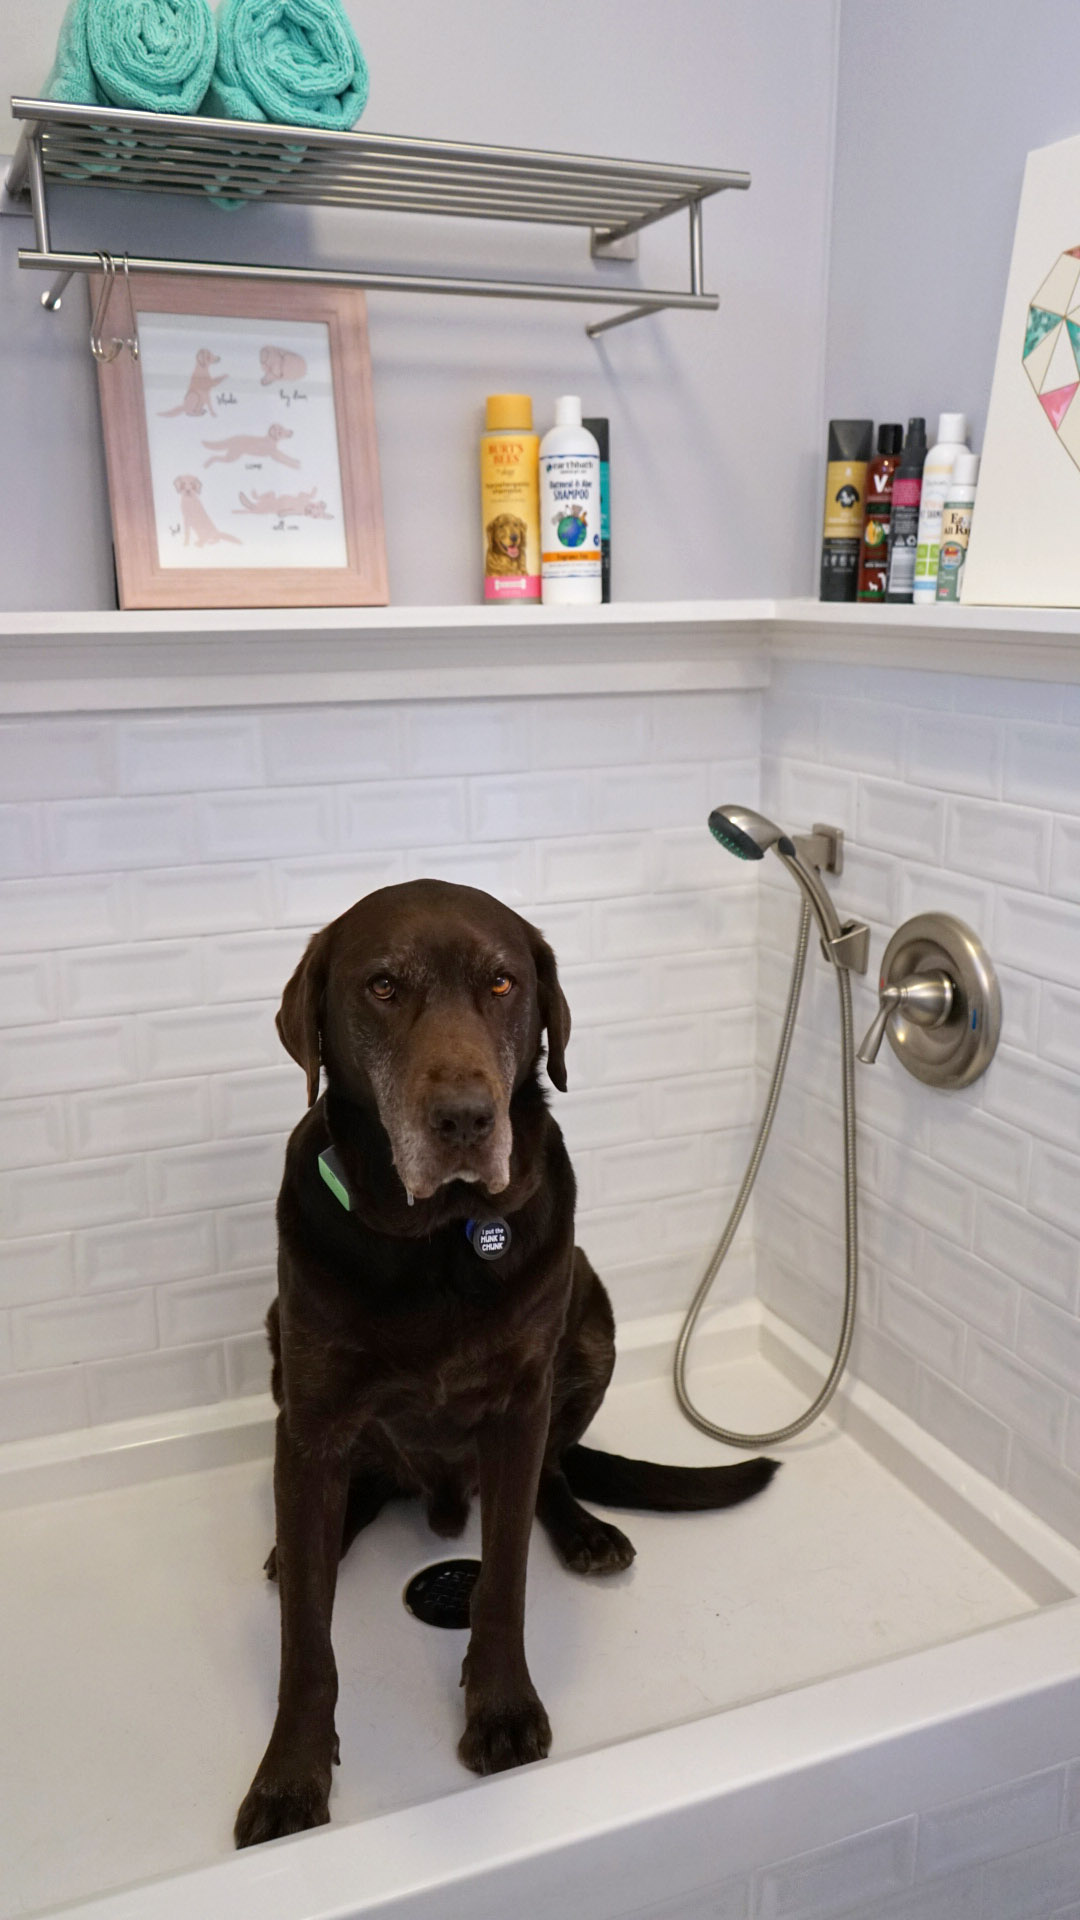 The Best Sprayer for Your Home Dog Wash is Meant for RV Living!